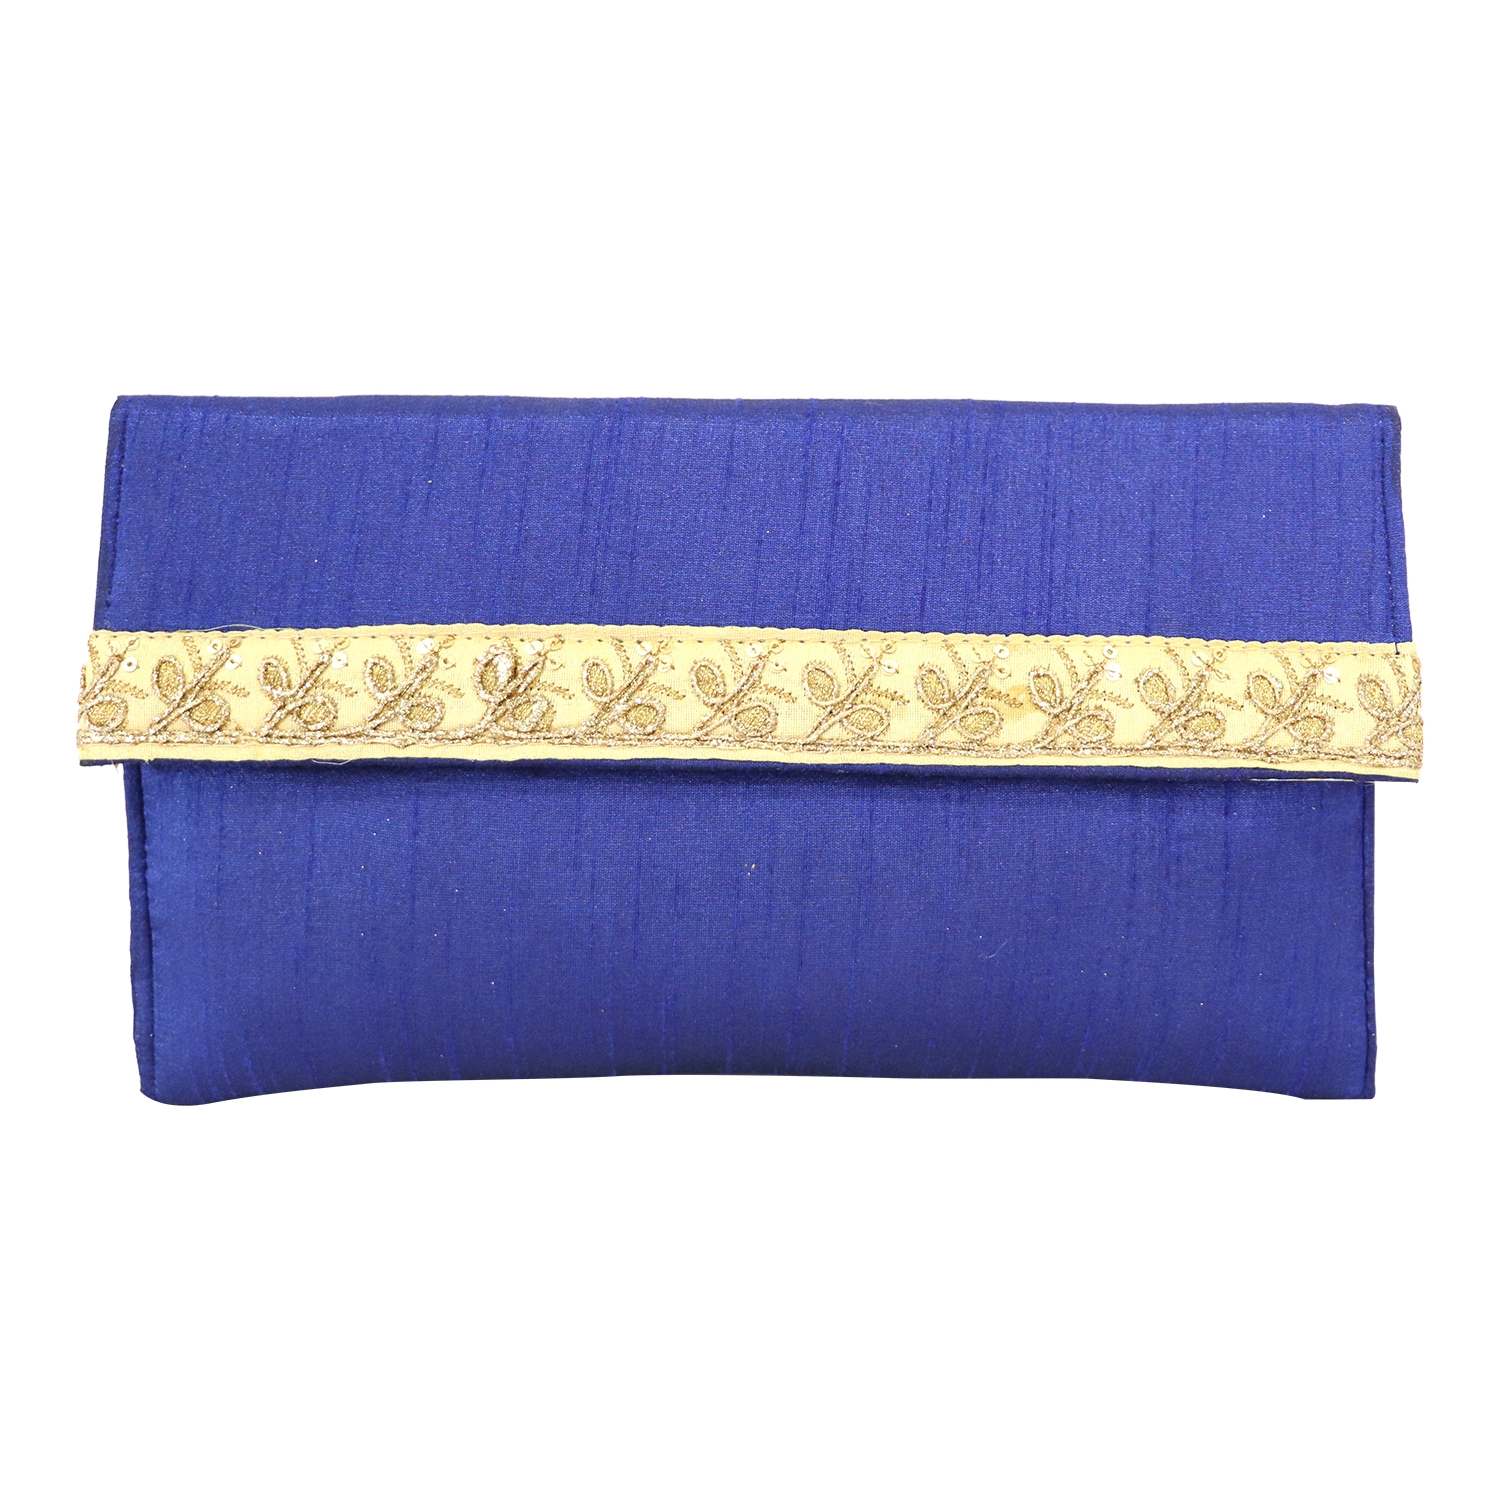 EMM | Lely's Stylish Modern Ethnic Party Clutch With Chain